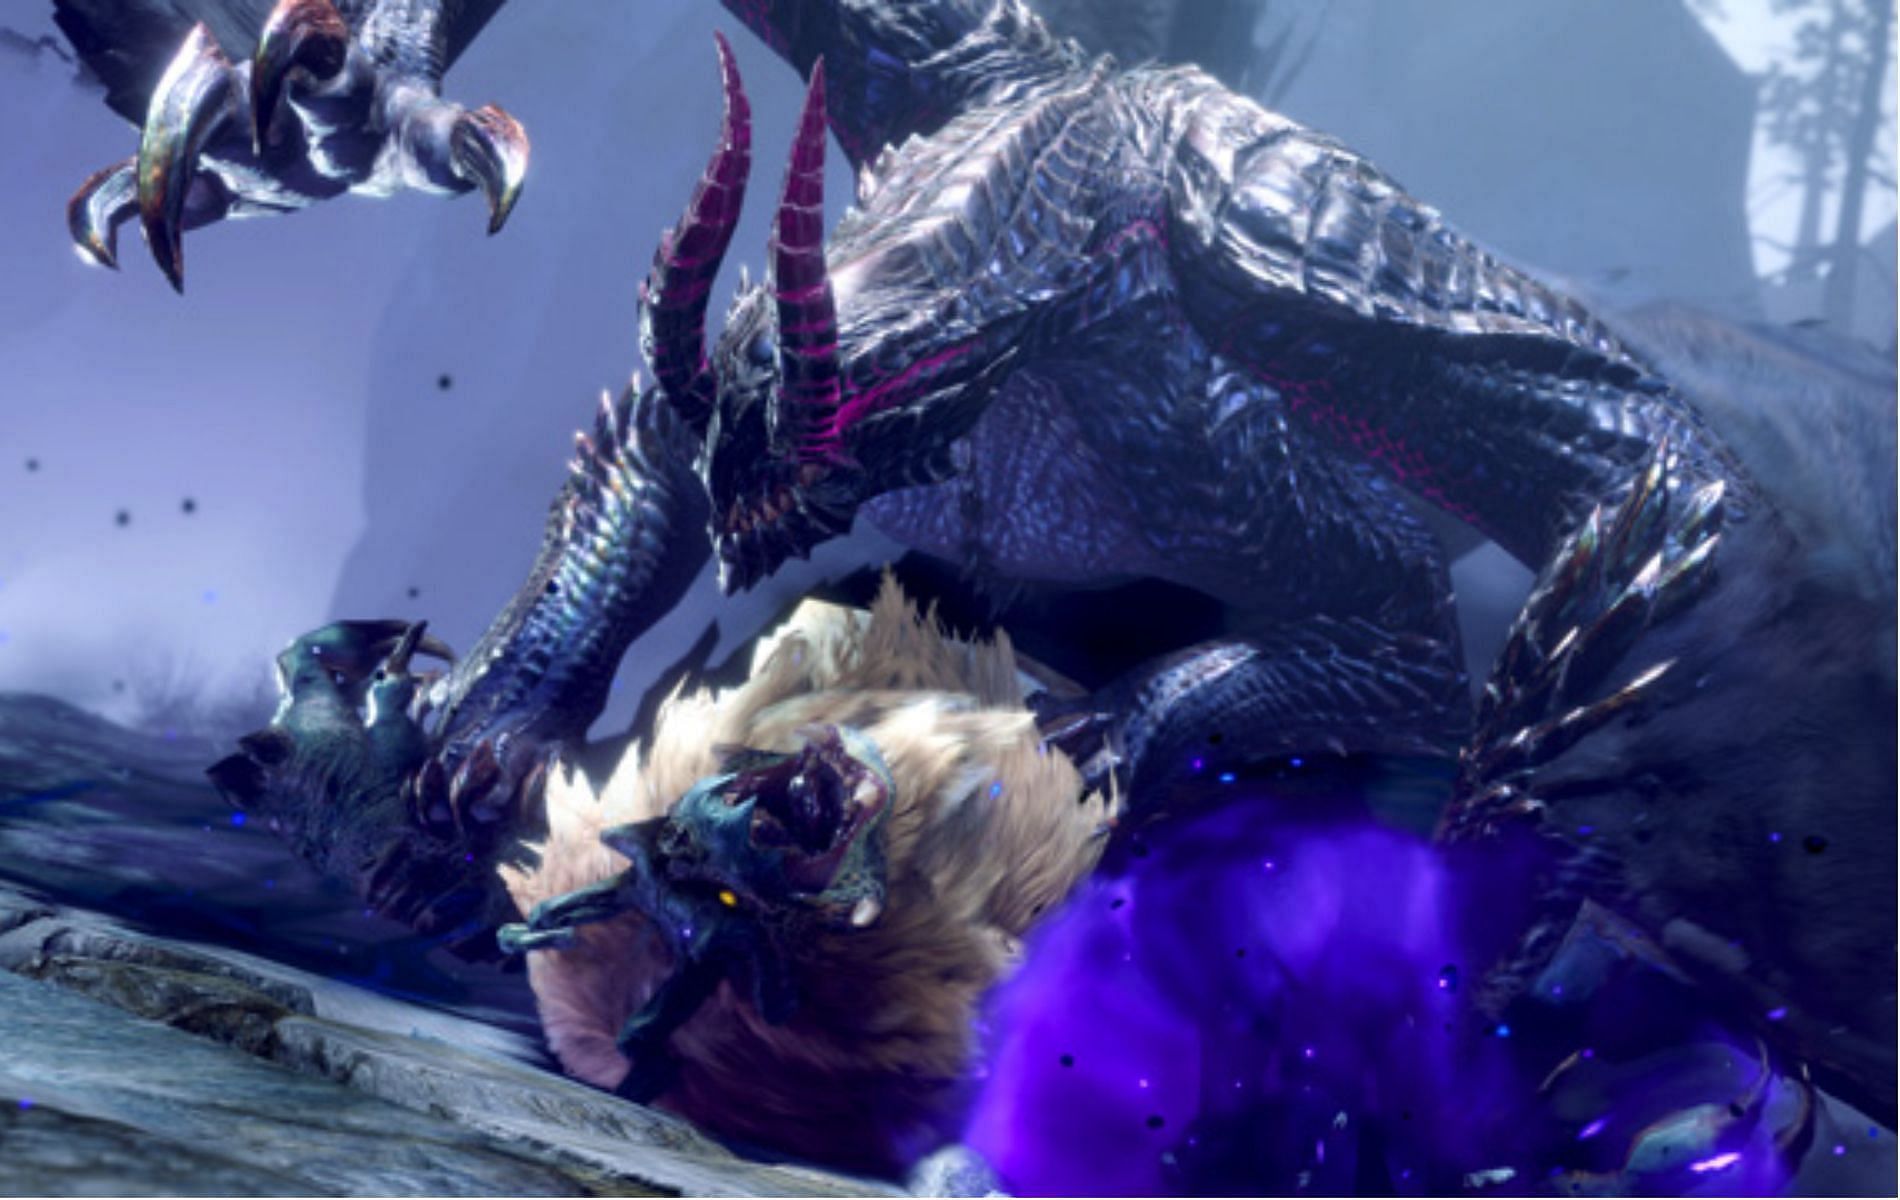 The Gore Magala as it appears in the game (Image via Capcom)